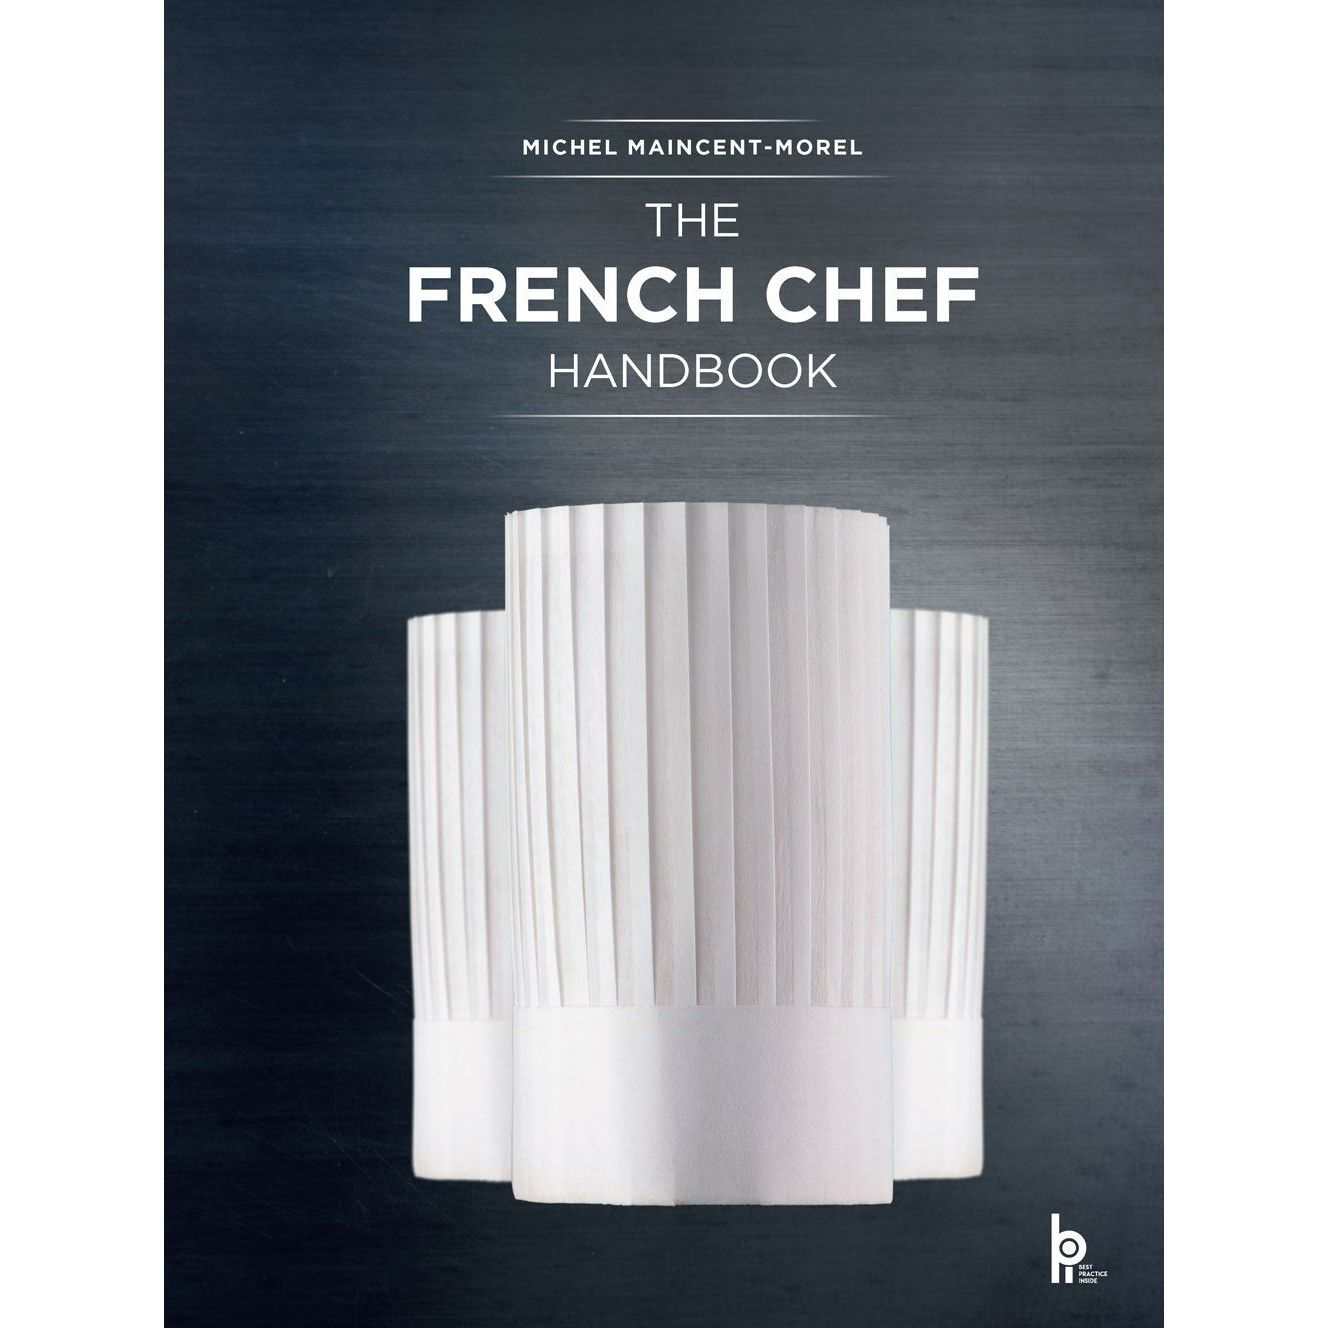 The French Chef Handbook (Michel Maincent-Morel)